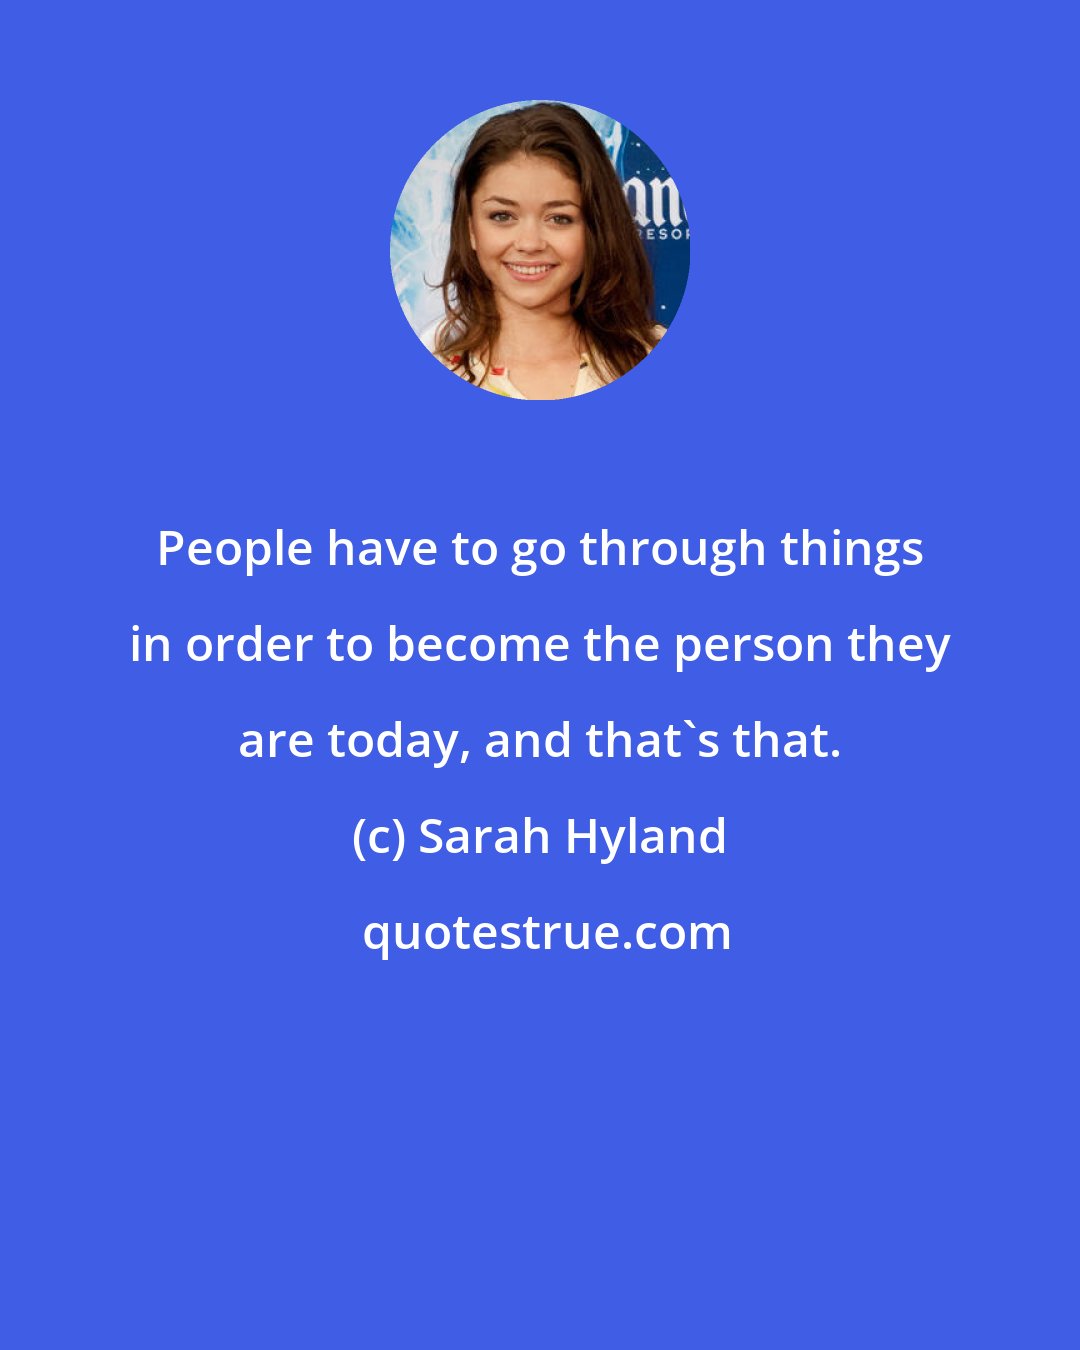 Sarah Hyland: People have to go through things in order to become the person they are today, and that's that.